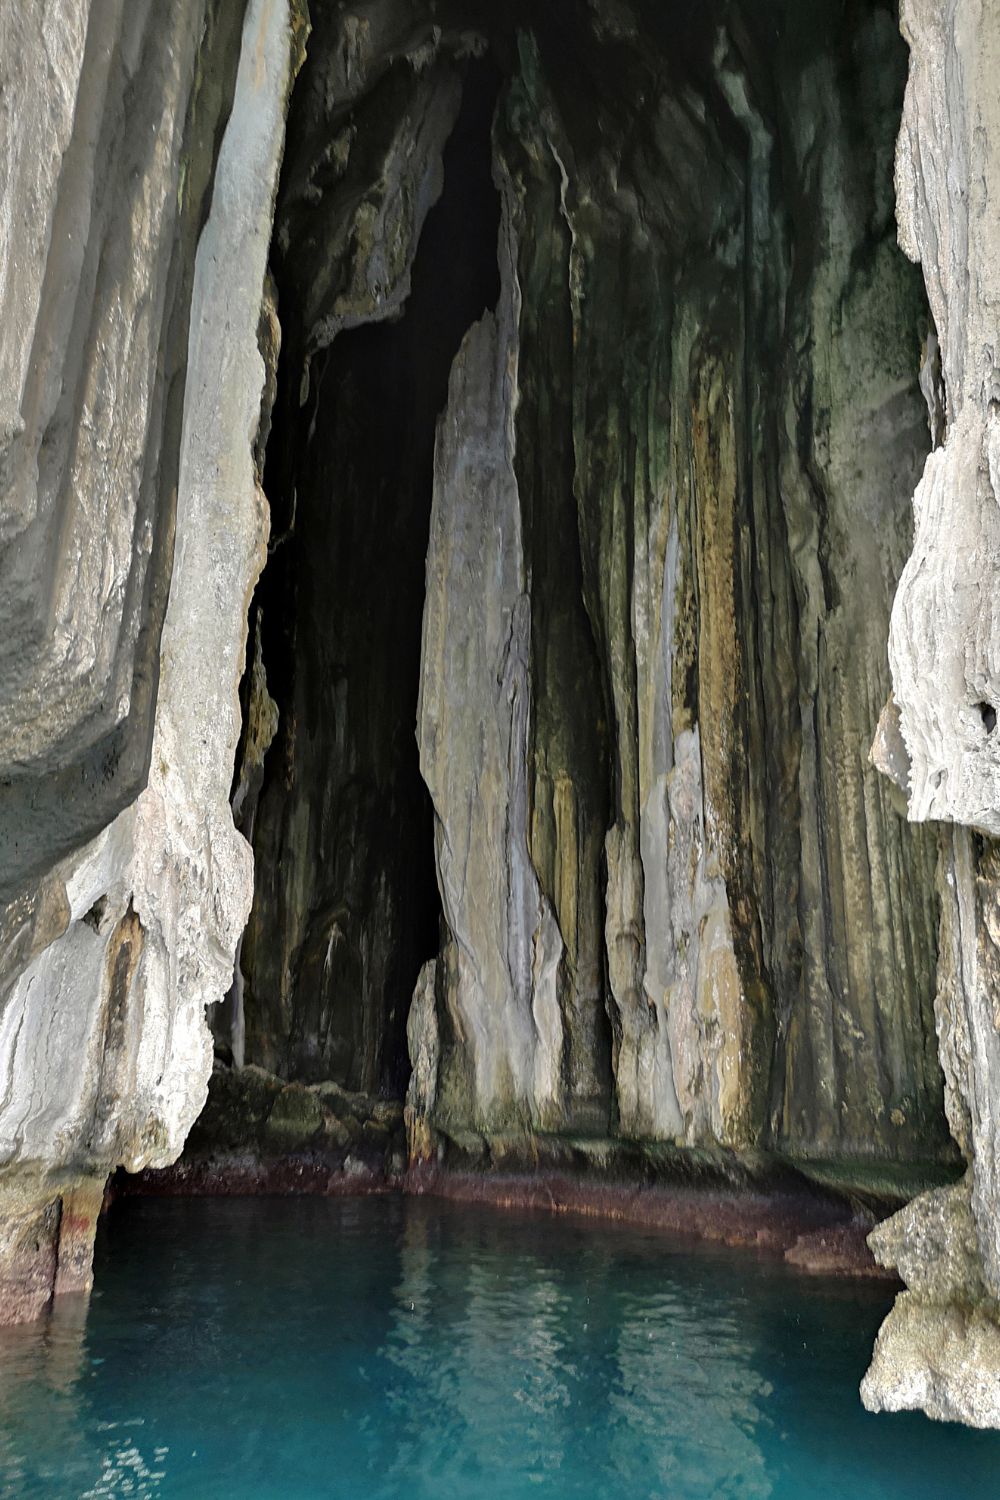 Cathedral Cave can be a different El Nido Adventures for everyone it seems